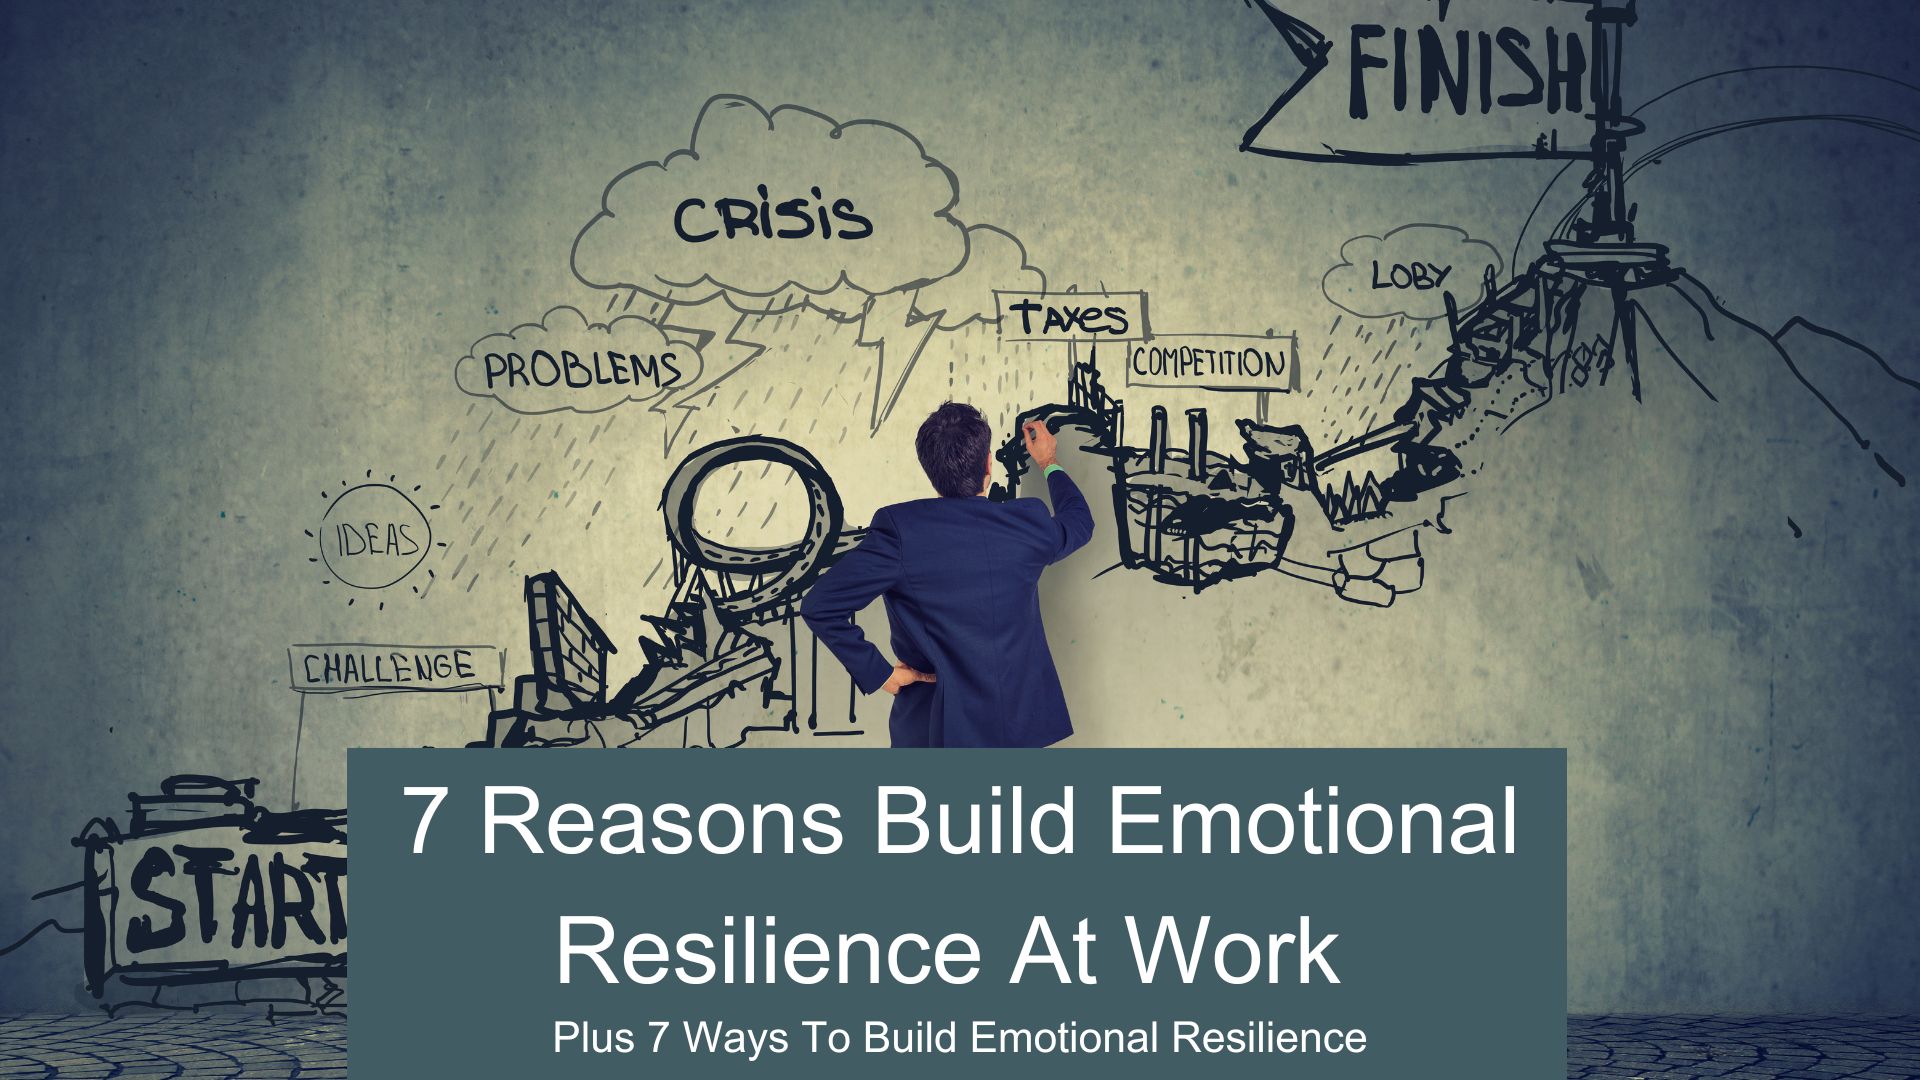 7 Reasons to Build Emotional Resilience at Work